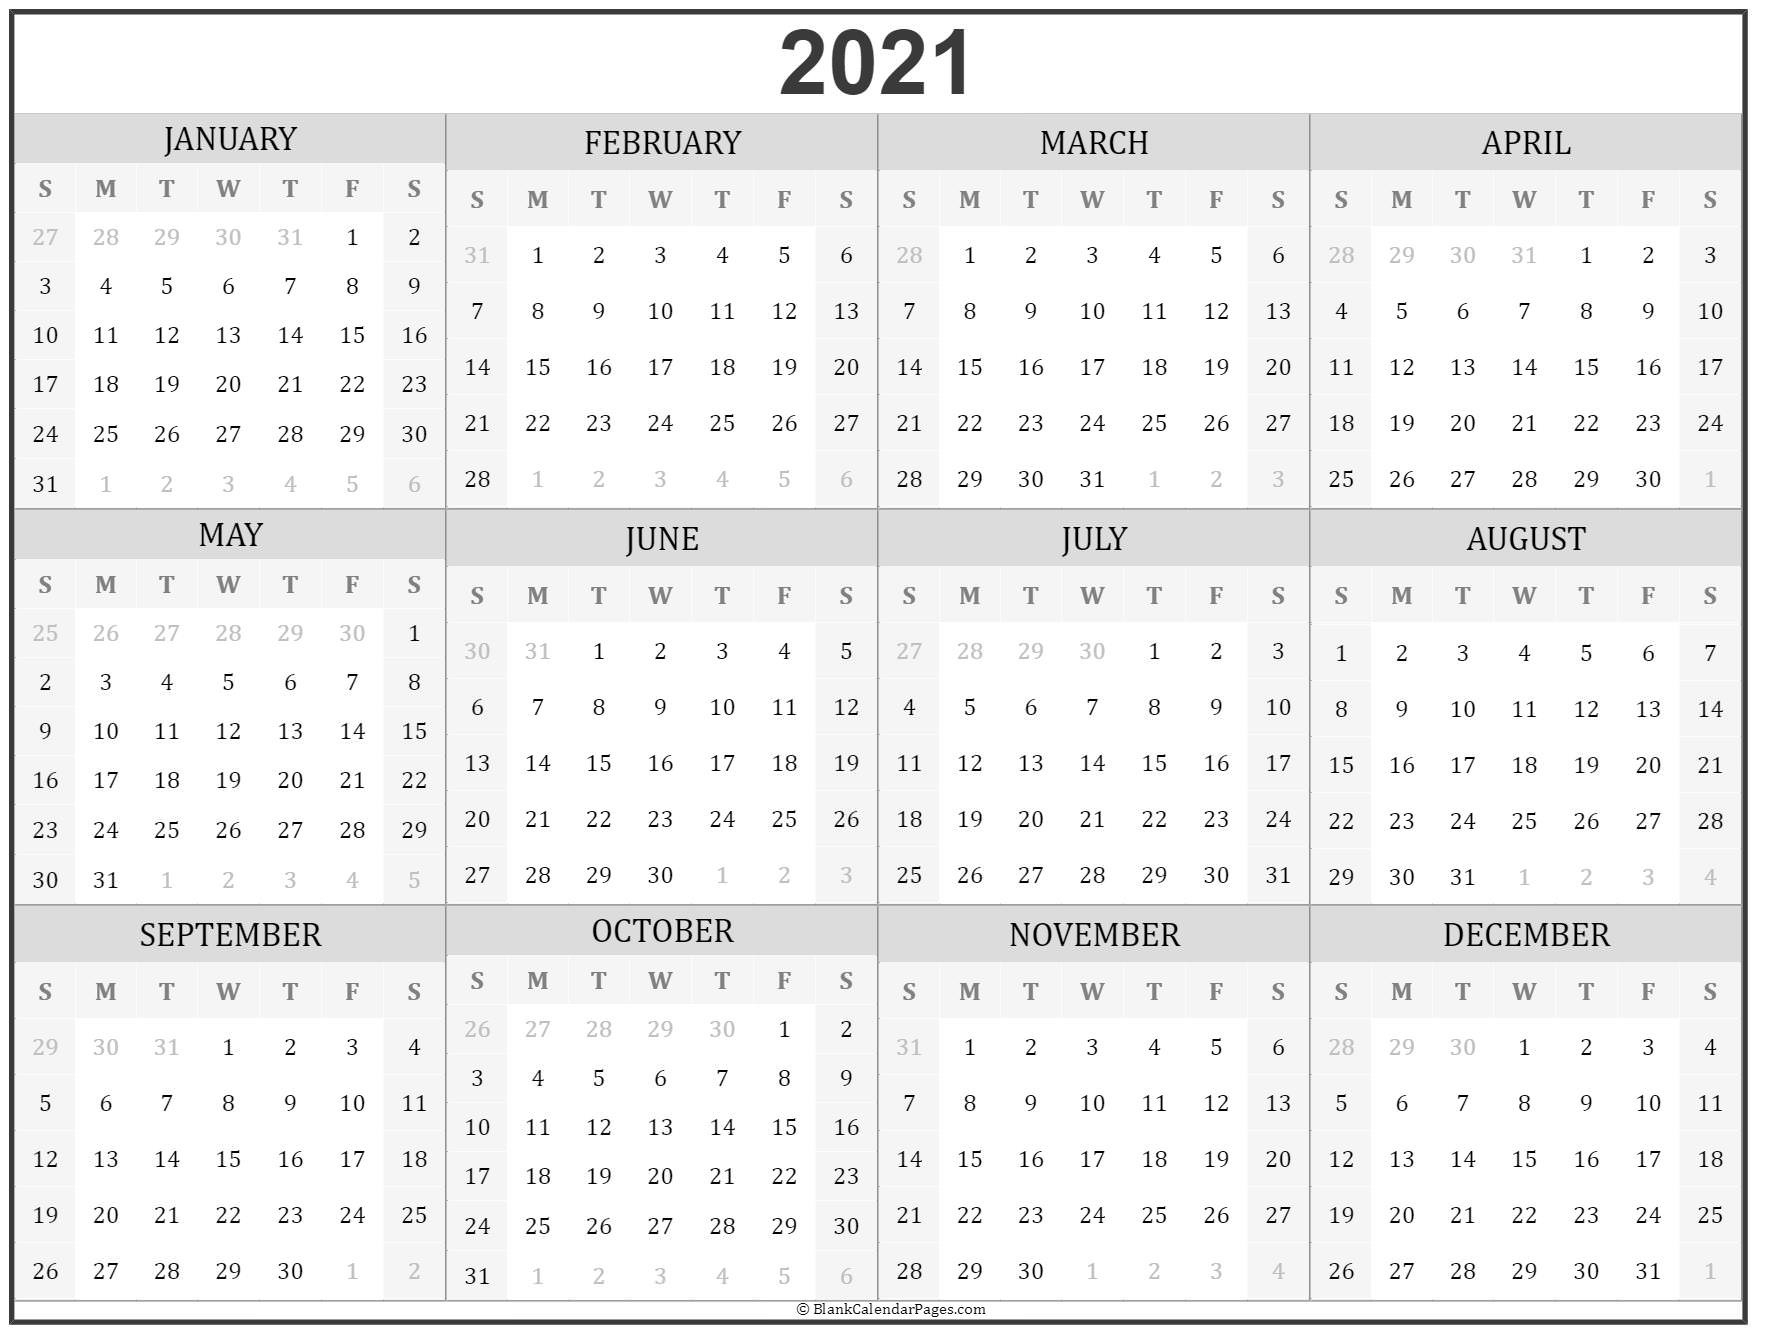 2021 Year Calendar | Yearly Printable-2 Page 2021 Calendar Printable Pages